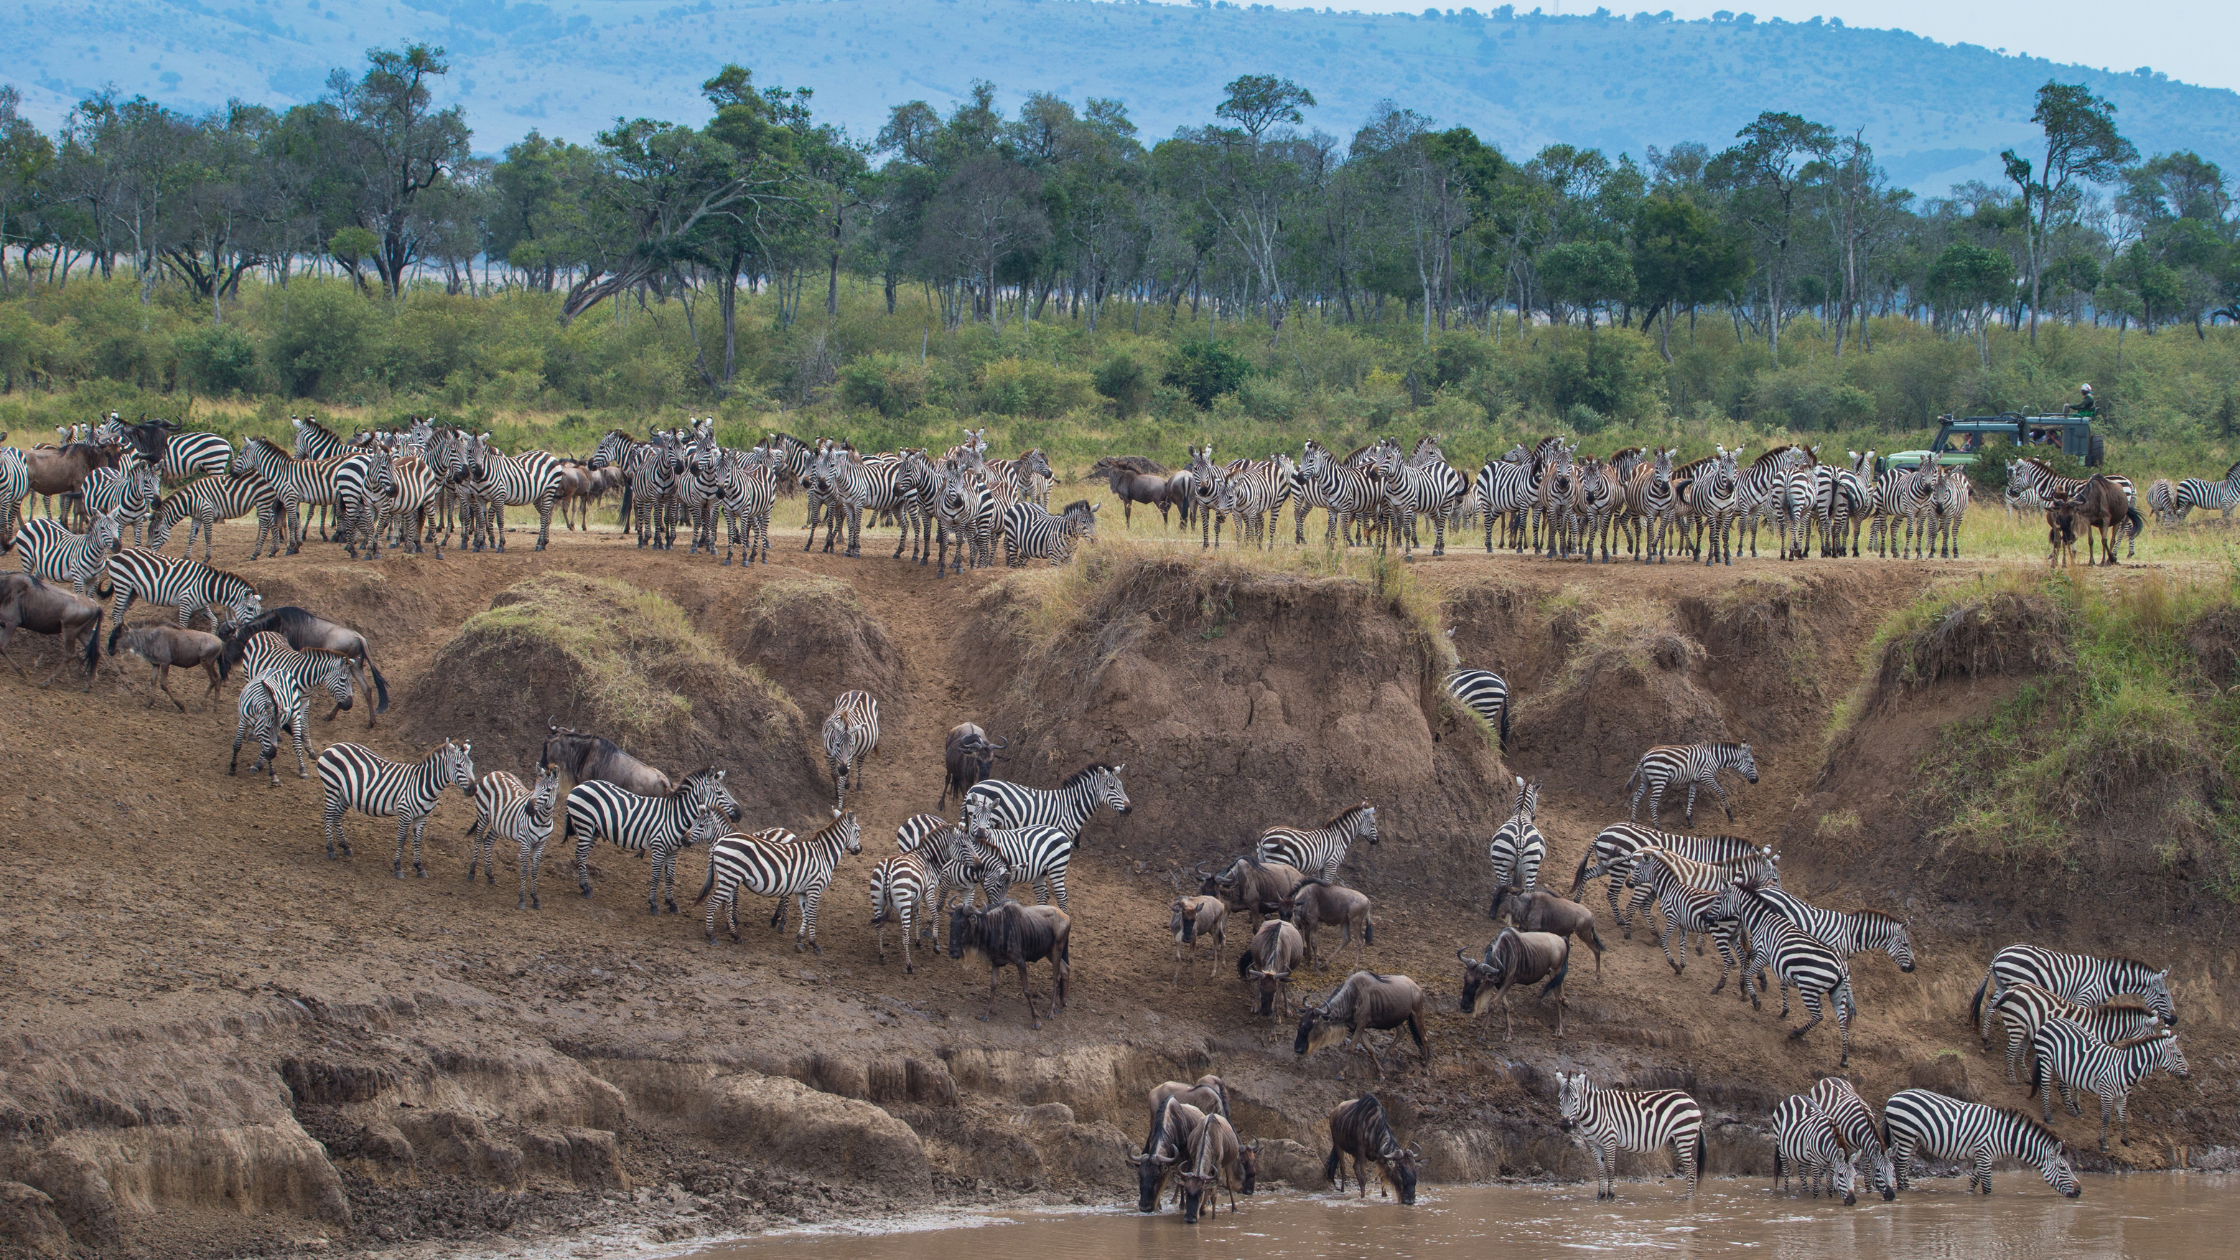 Wildebeest and zebras during the Great Migration in Kenya